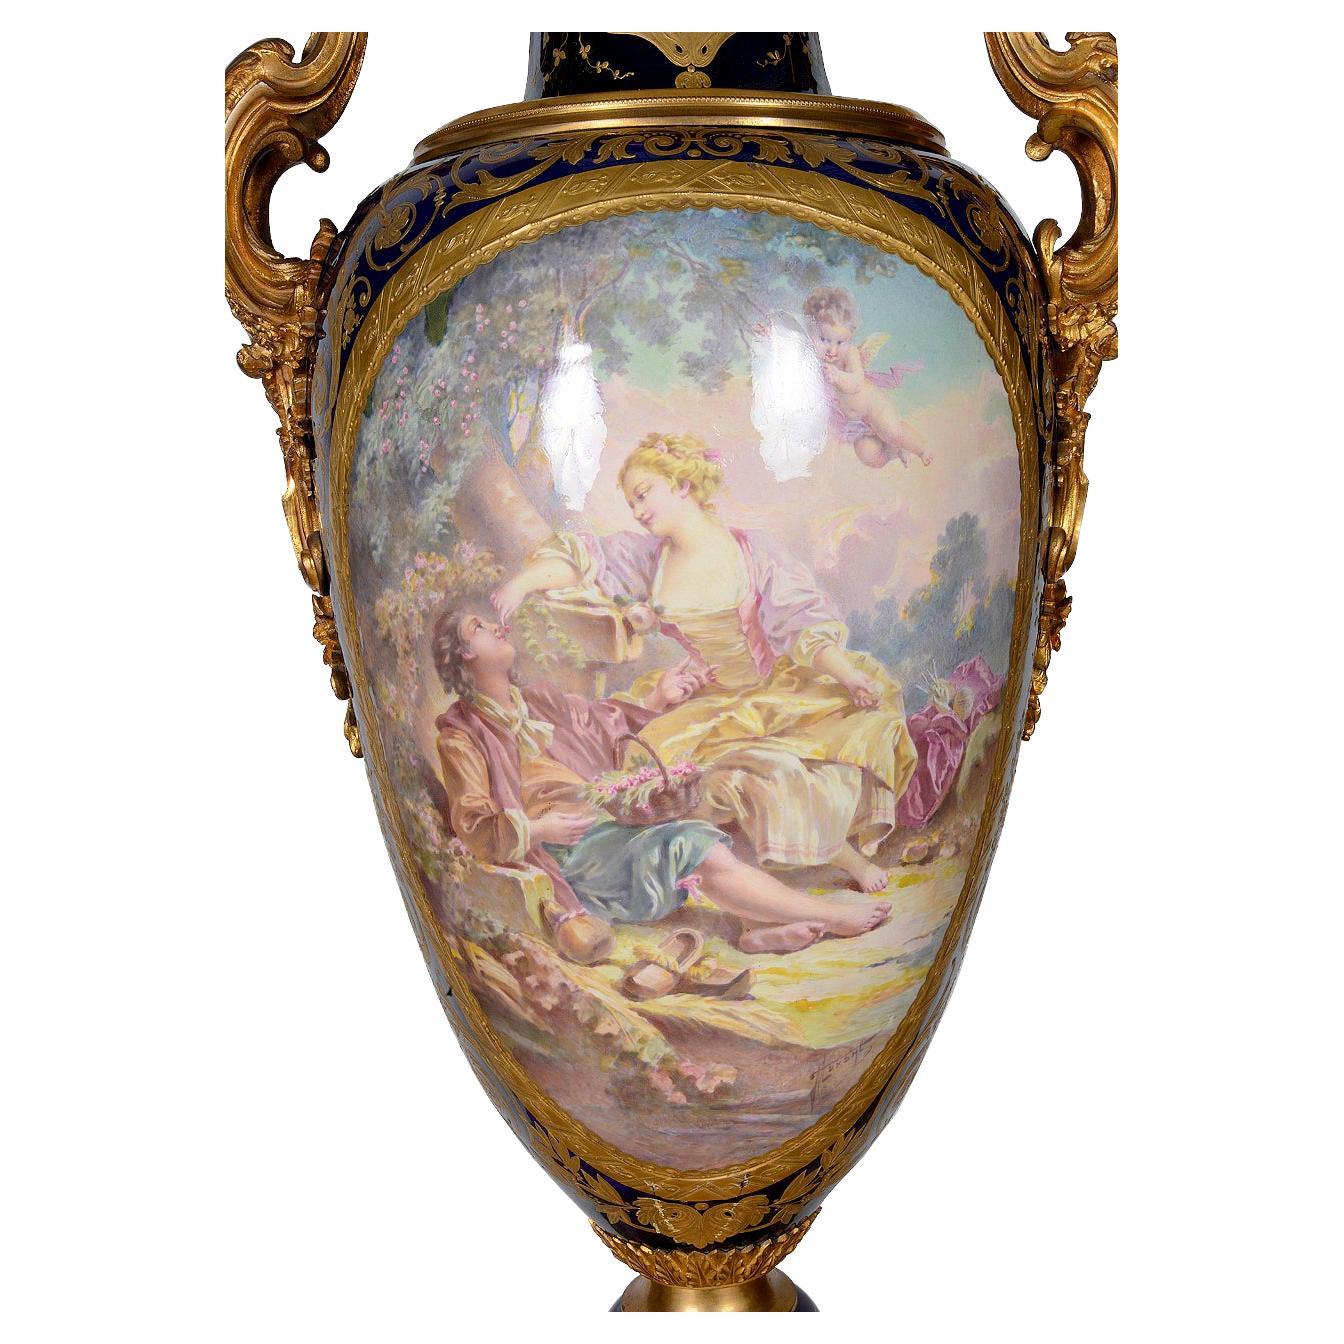 A very impressive late 19th Century French Louis XVI Sevres style porcelain lidded vase. Having a classical Cobalt blue ground, gilded scrolling detail, moulding and handles. A beautifully hand painted romantic scene of reclining lovers, signed